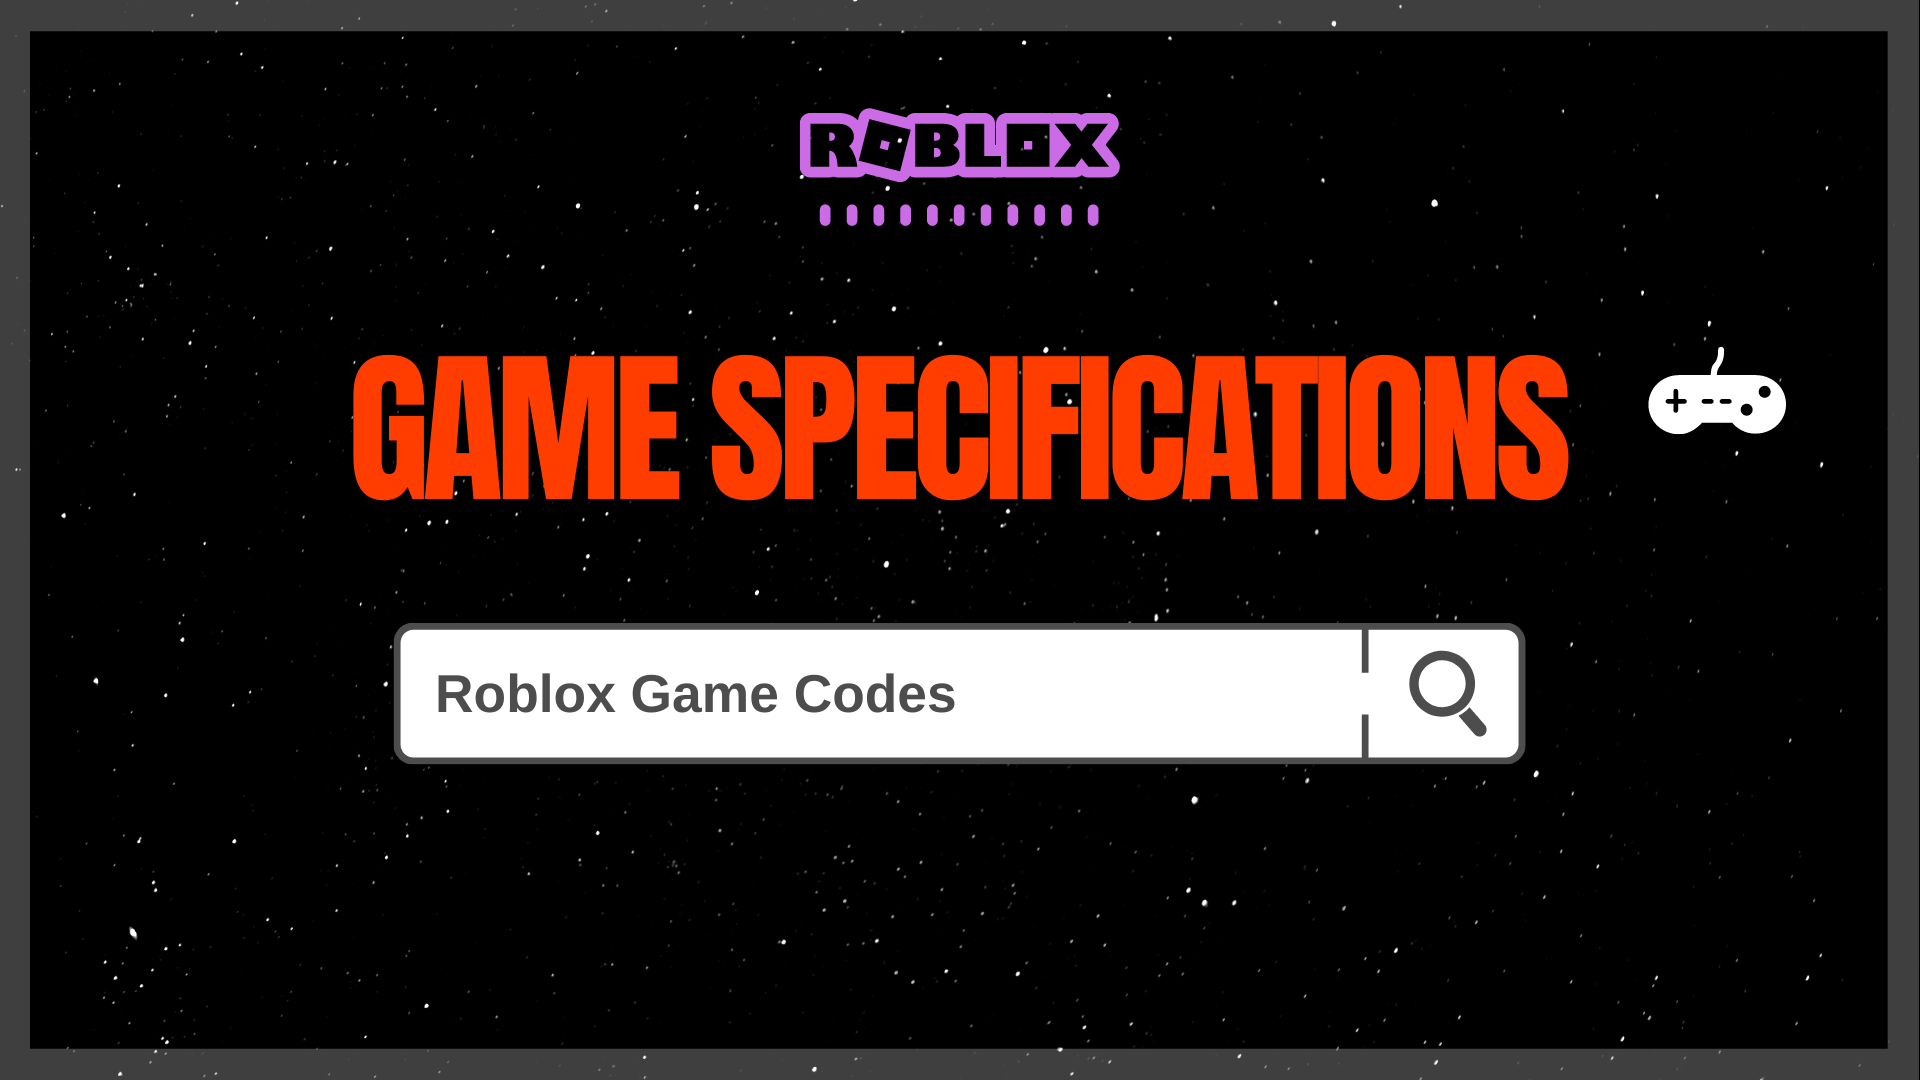 All In One Roblox Game Codes ᐈ Encylopedia Game Specifications - all game codes roblox